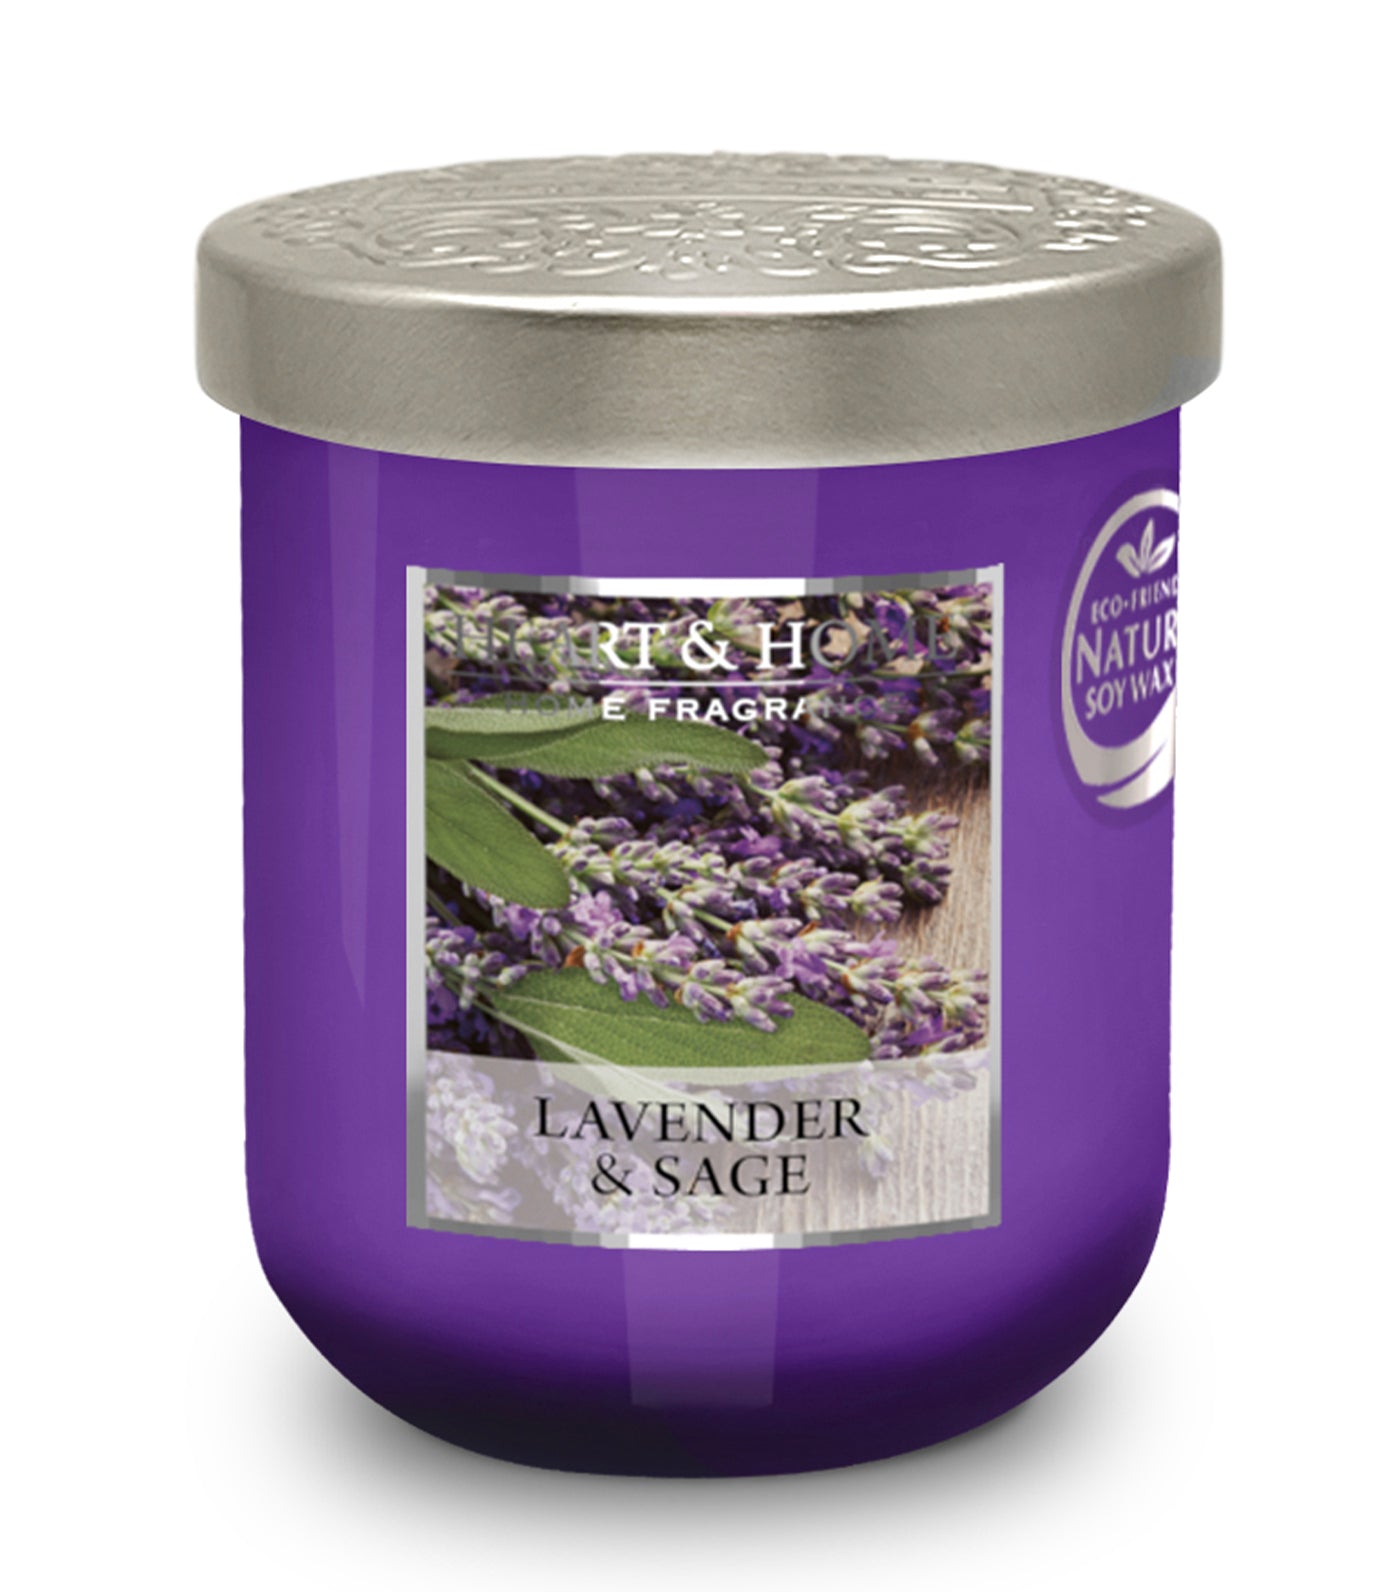 Heart & Home Lavender & Sage Eco Soy Candle